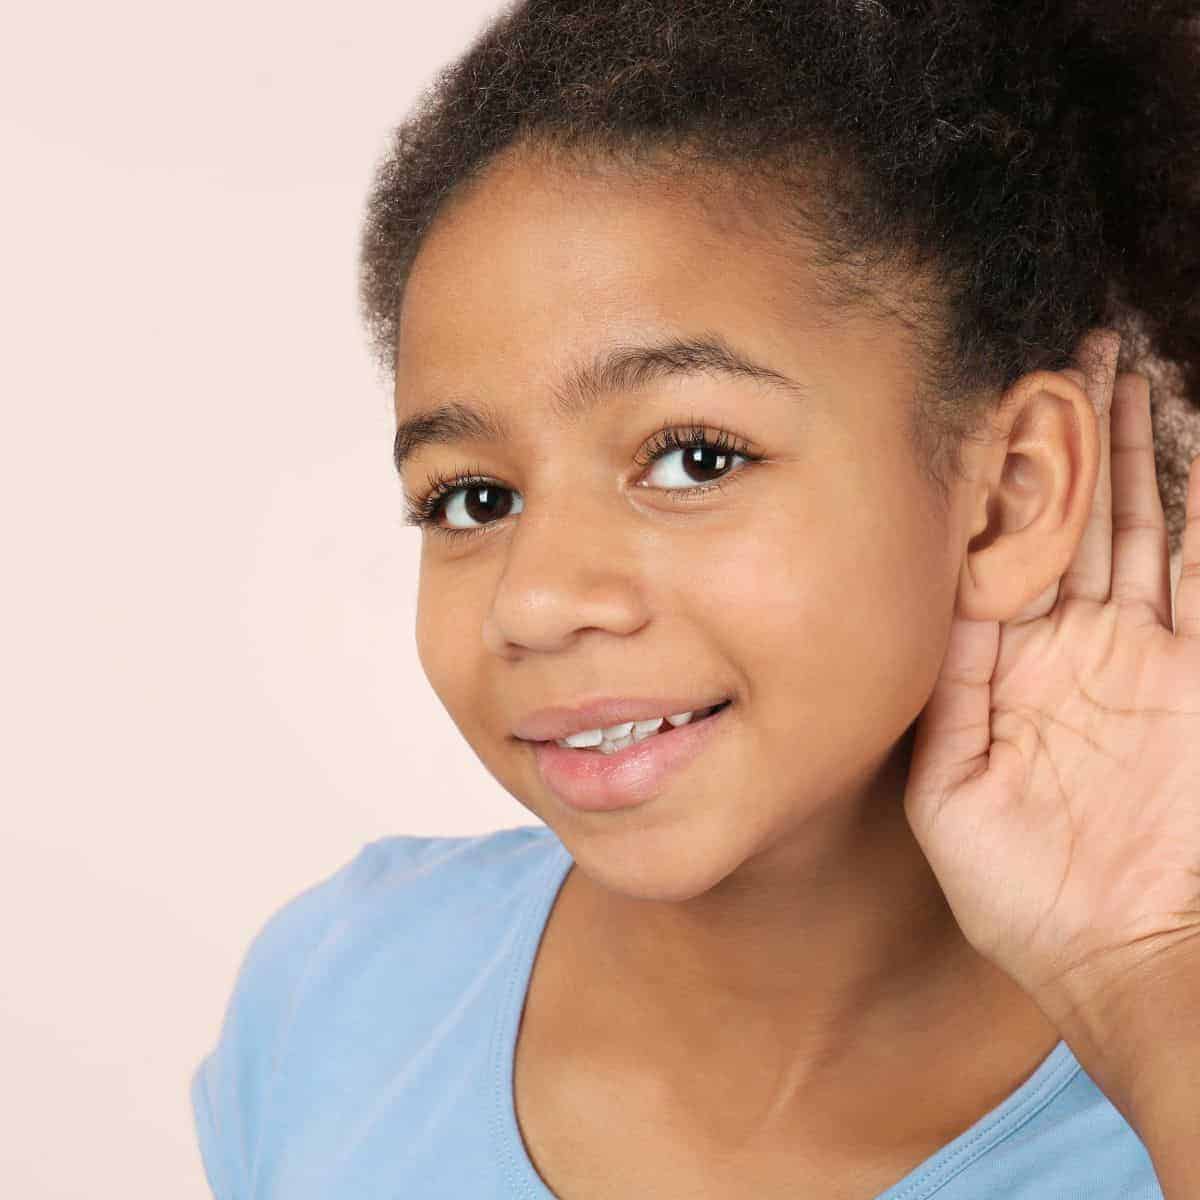 Auditory sensory activities are perfect for helping kids overcome auditory processing disorders, auditory seeking and auditory sensitivities. Try these 10 activities to help with auditory sensory processing.